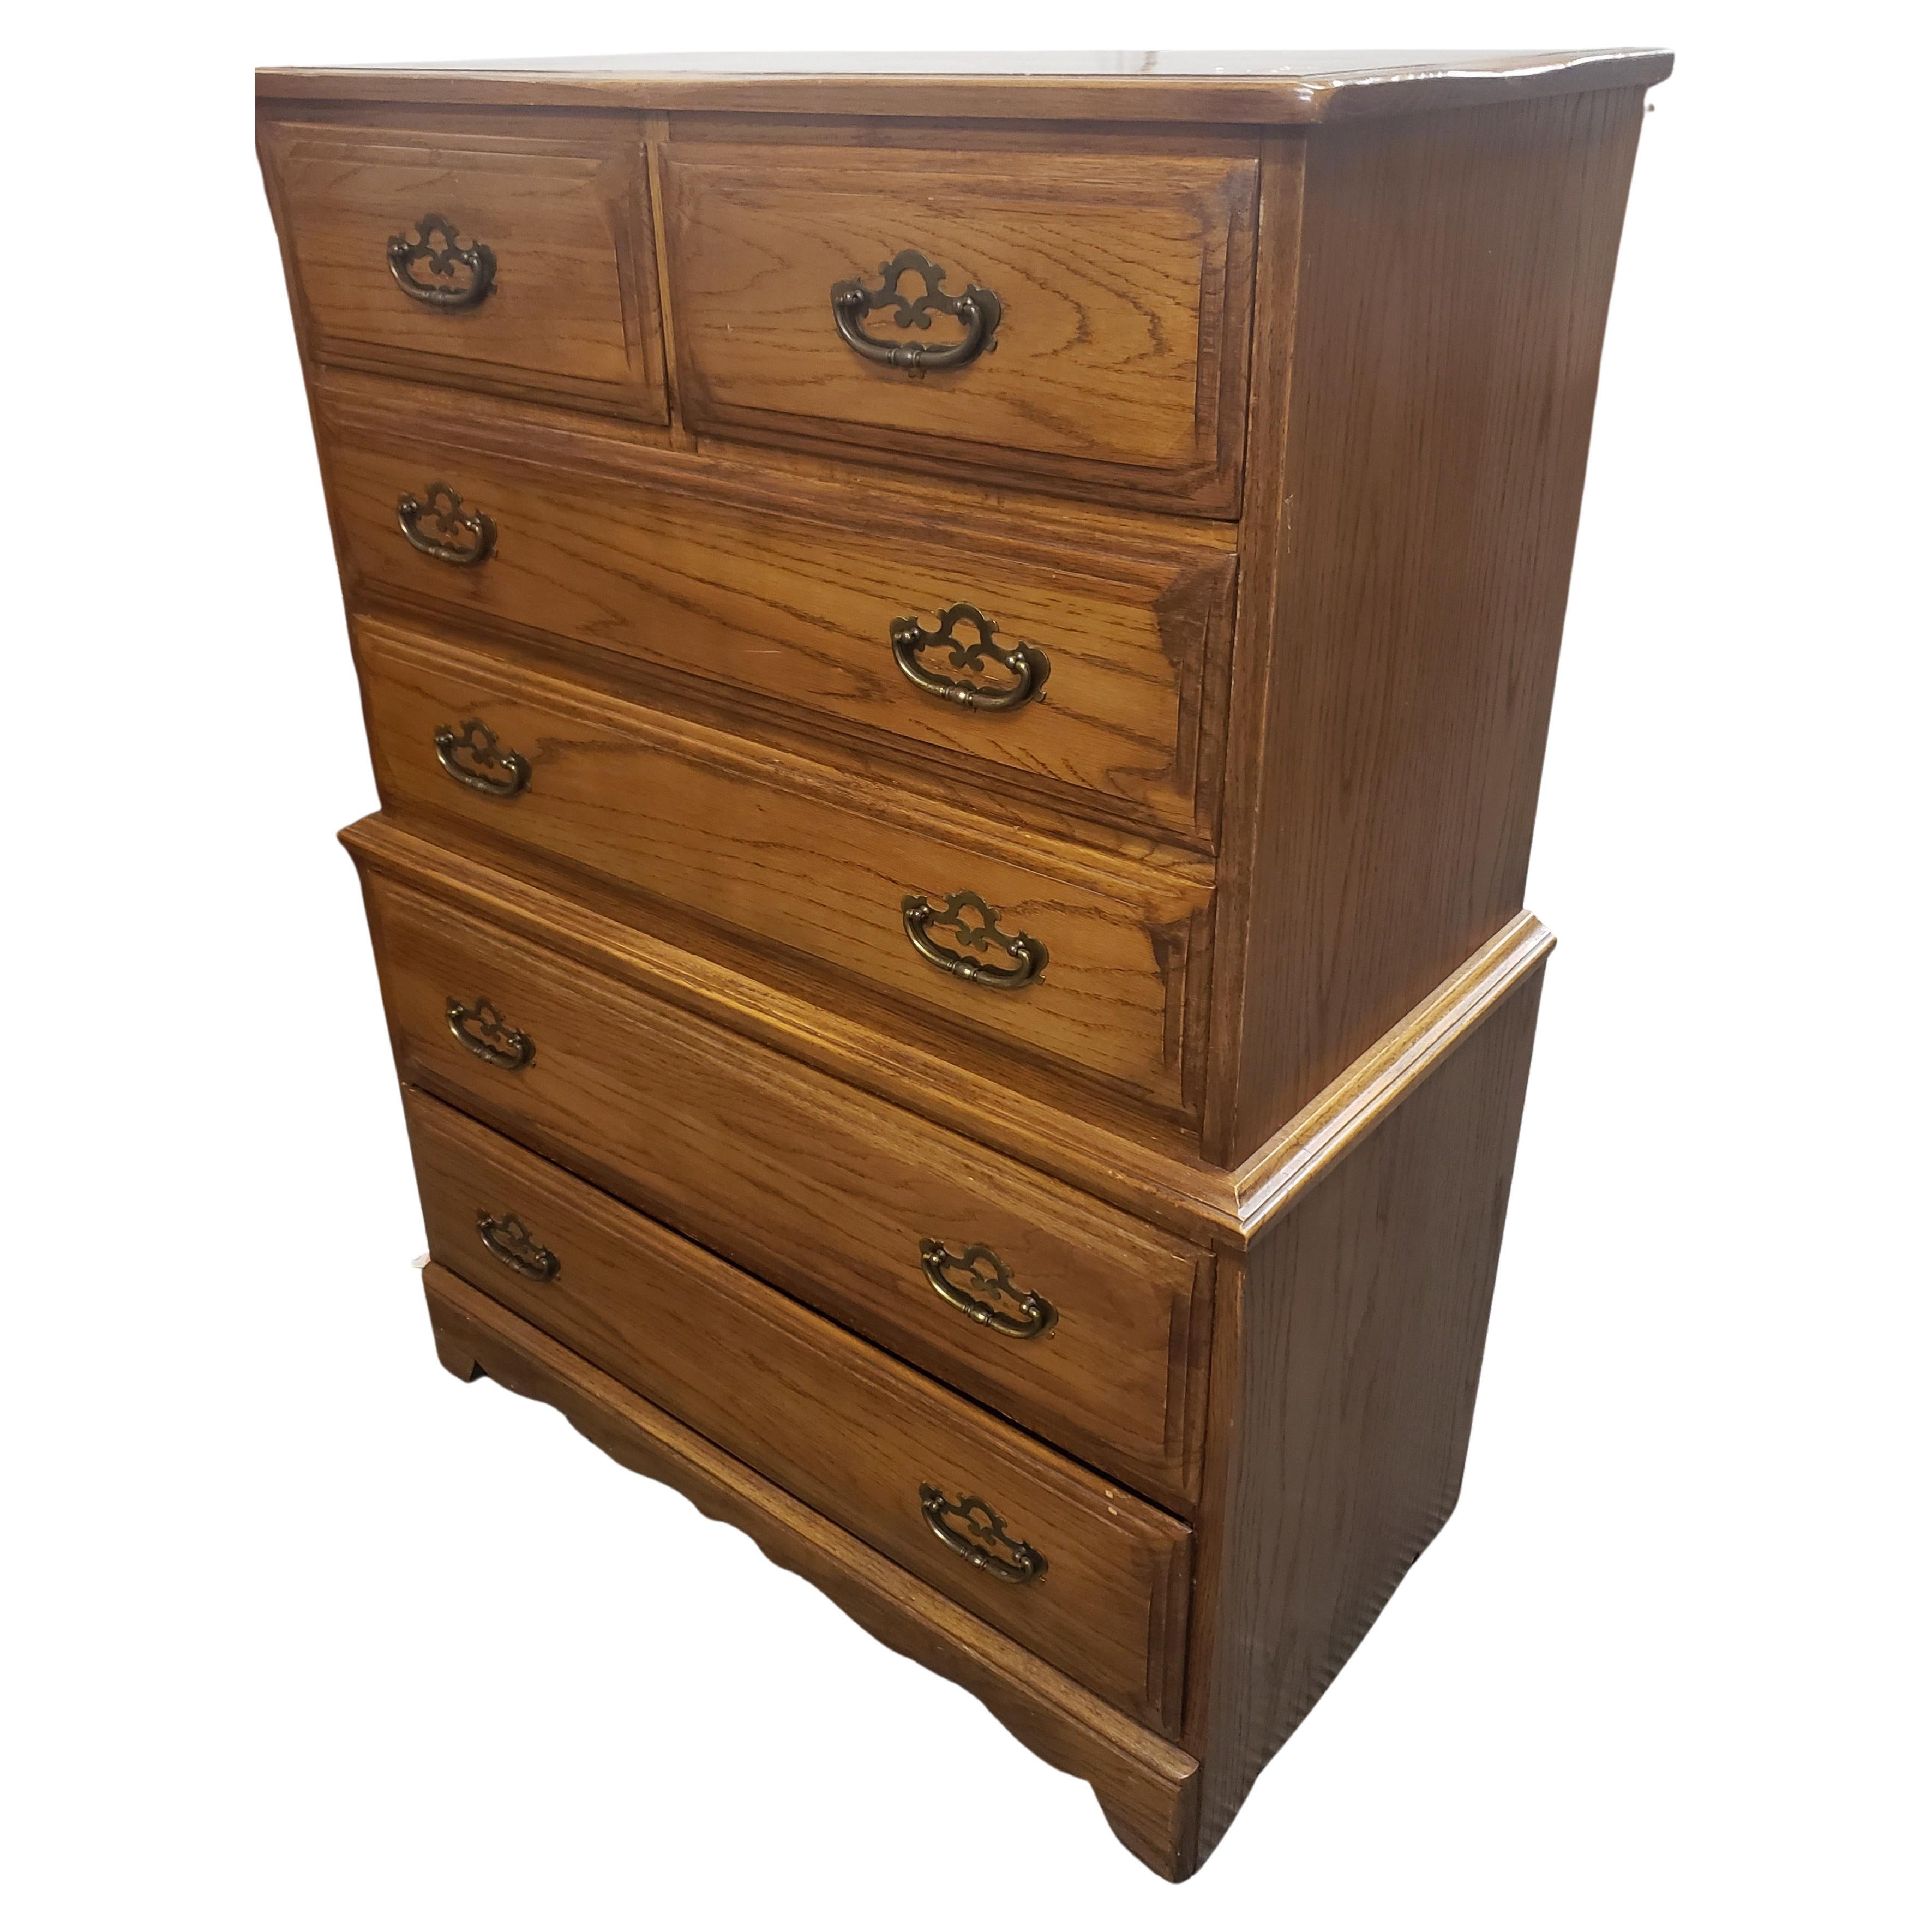 Vintage Ballman Cummings Solid Oak Chest of Drawers In Good Condition For Sale In Germantown, MD